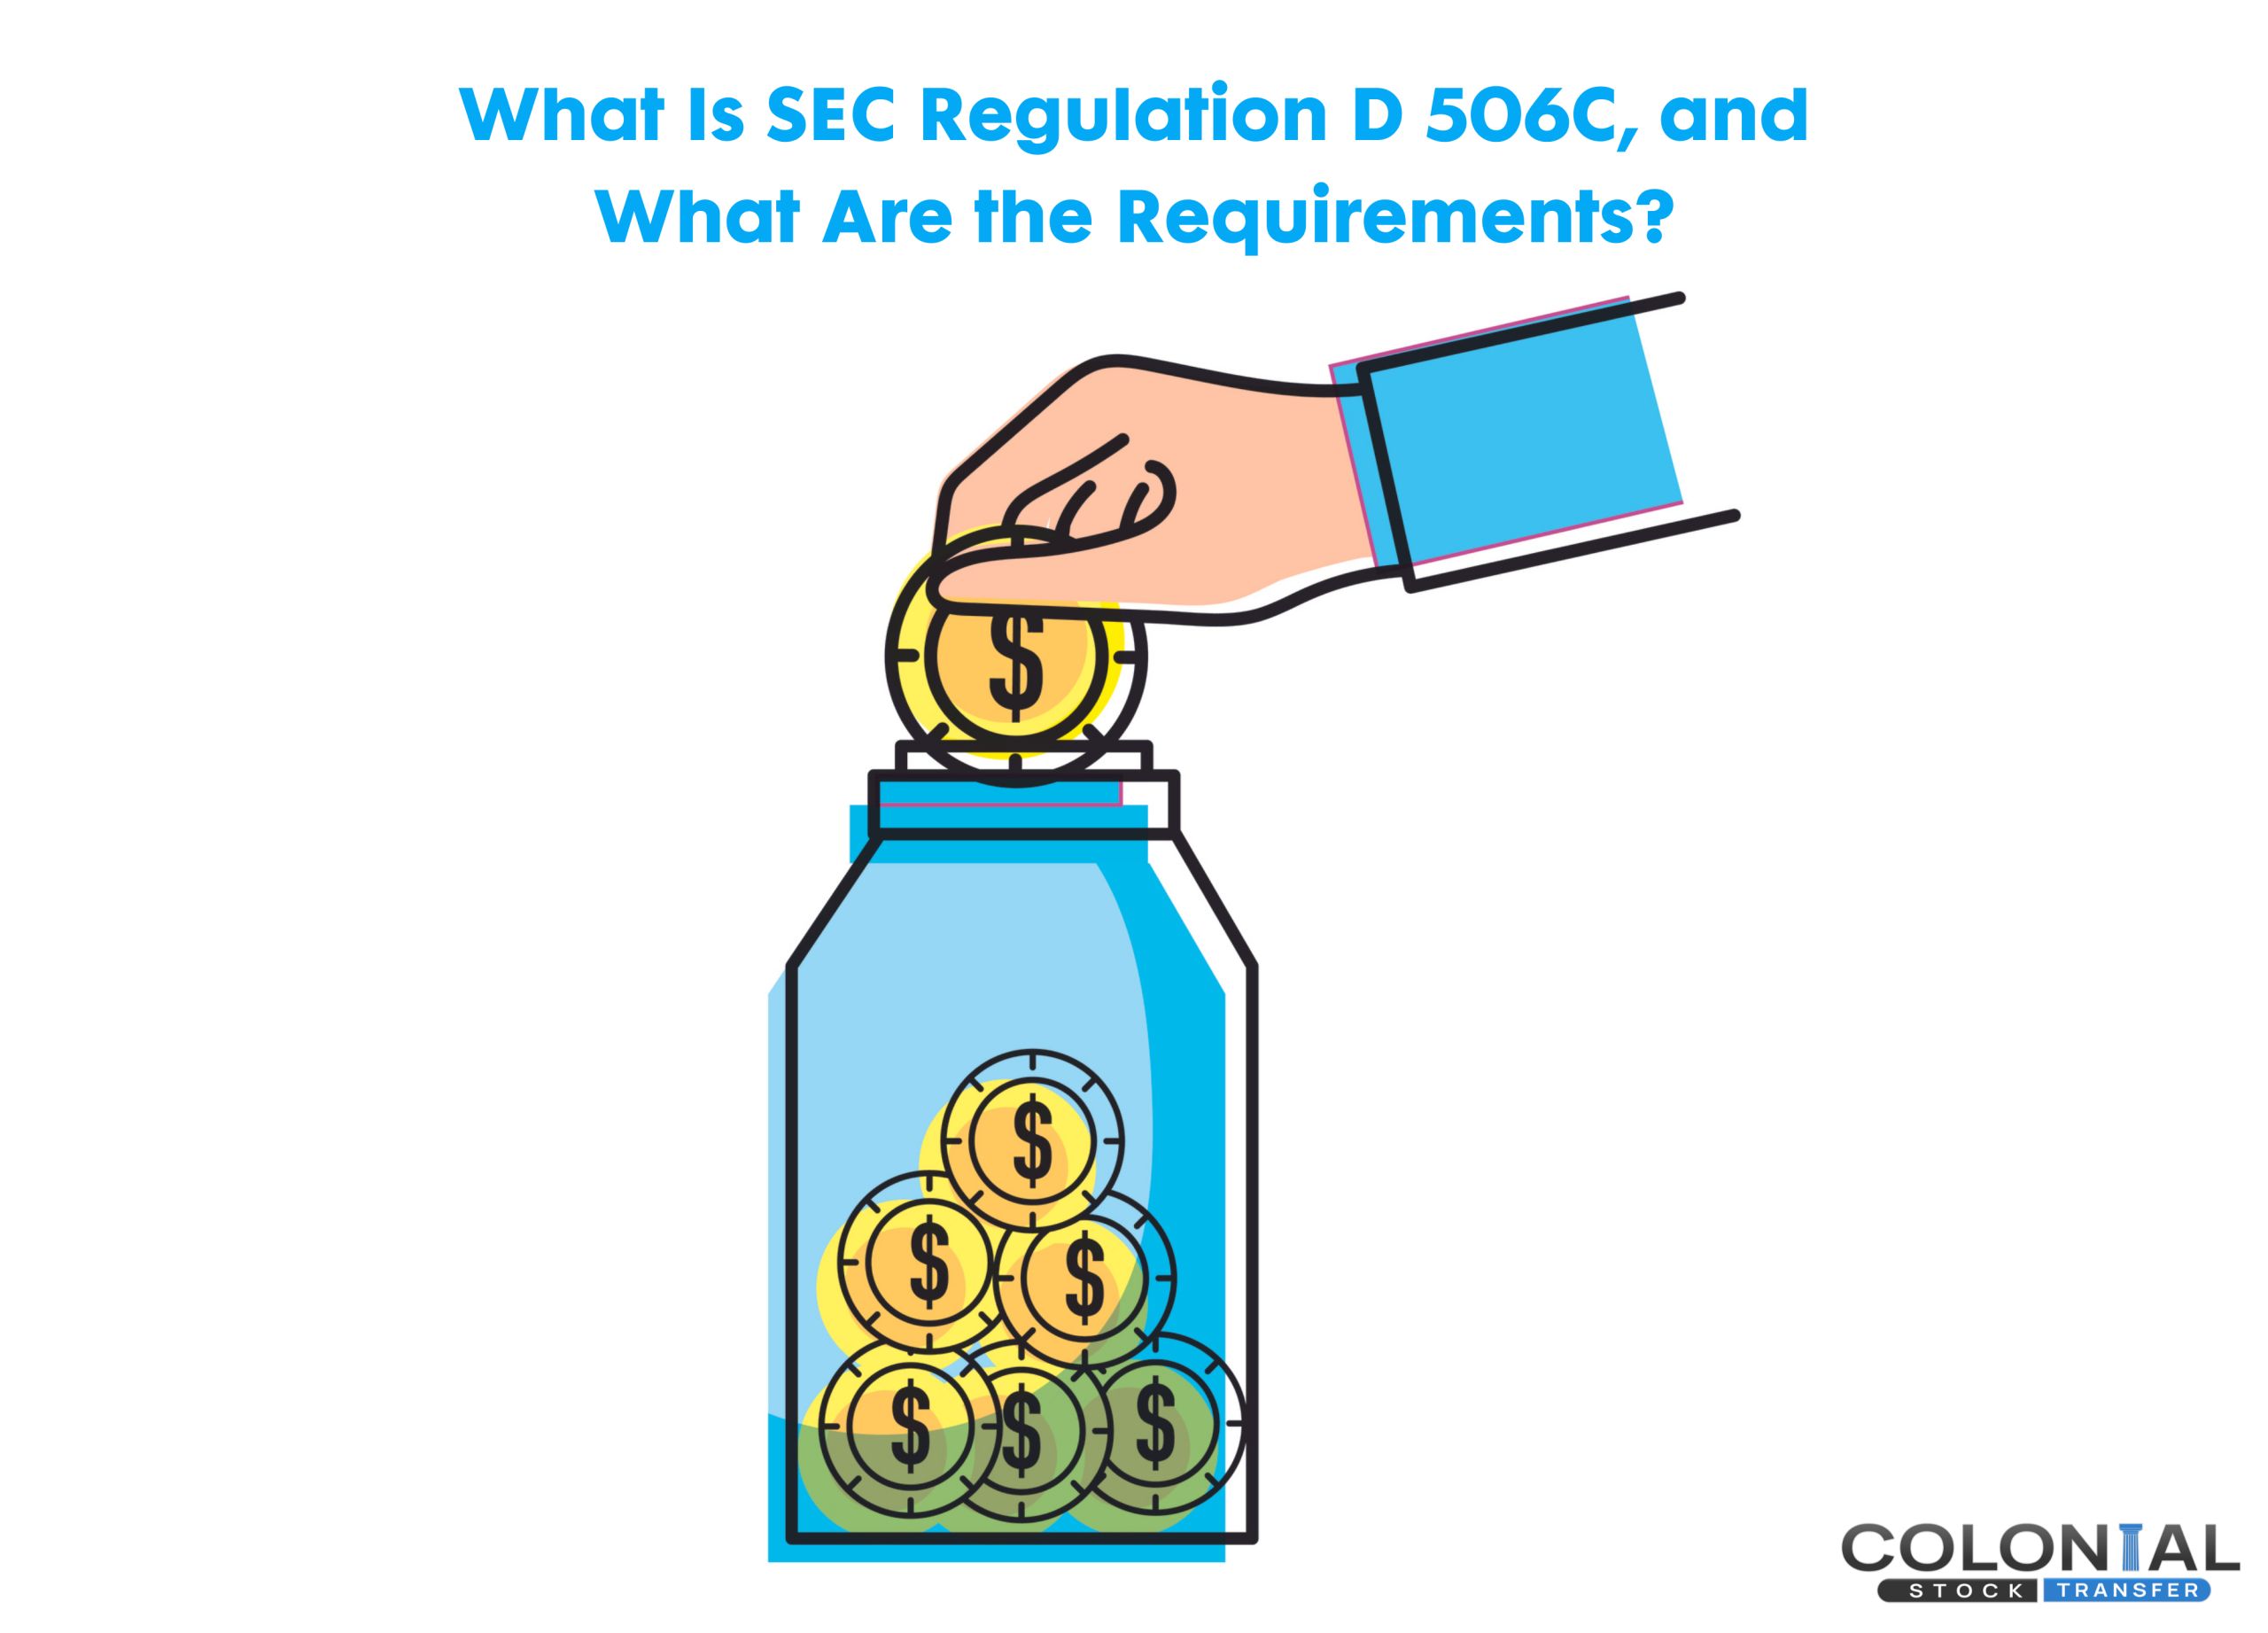 What Is SEC Regulation D 506C, and What Are the Requirements?